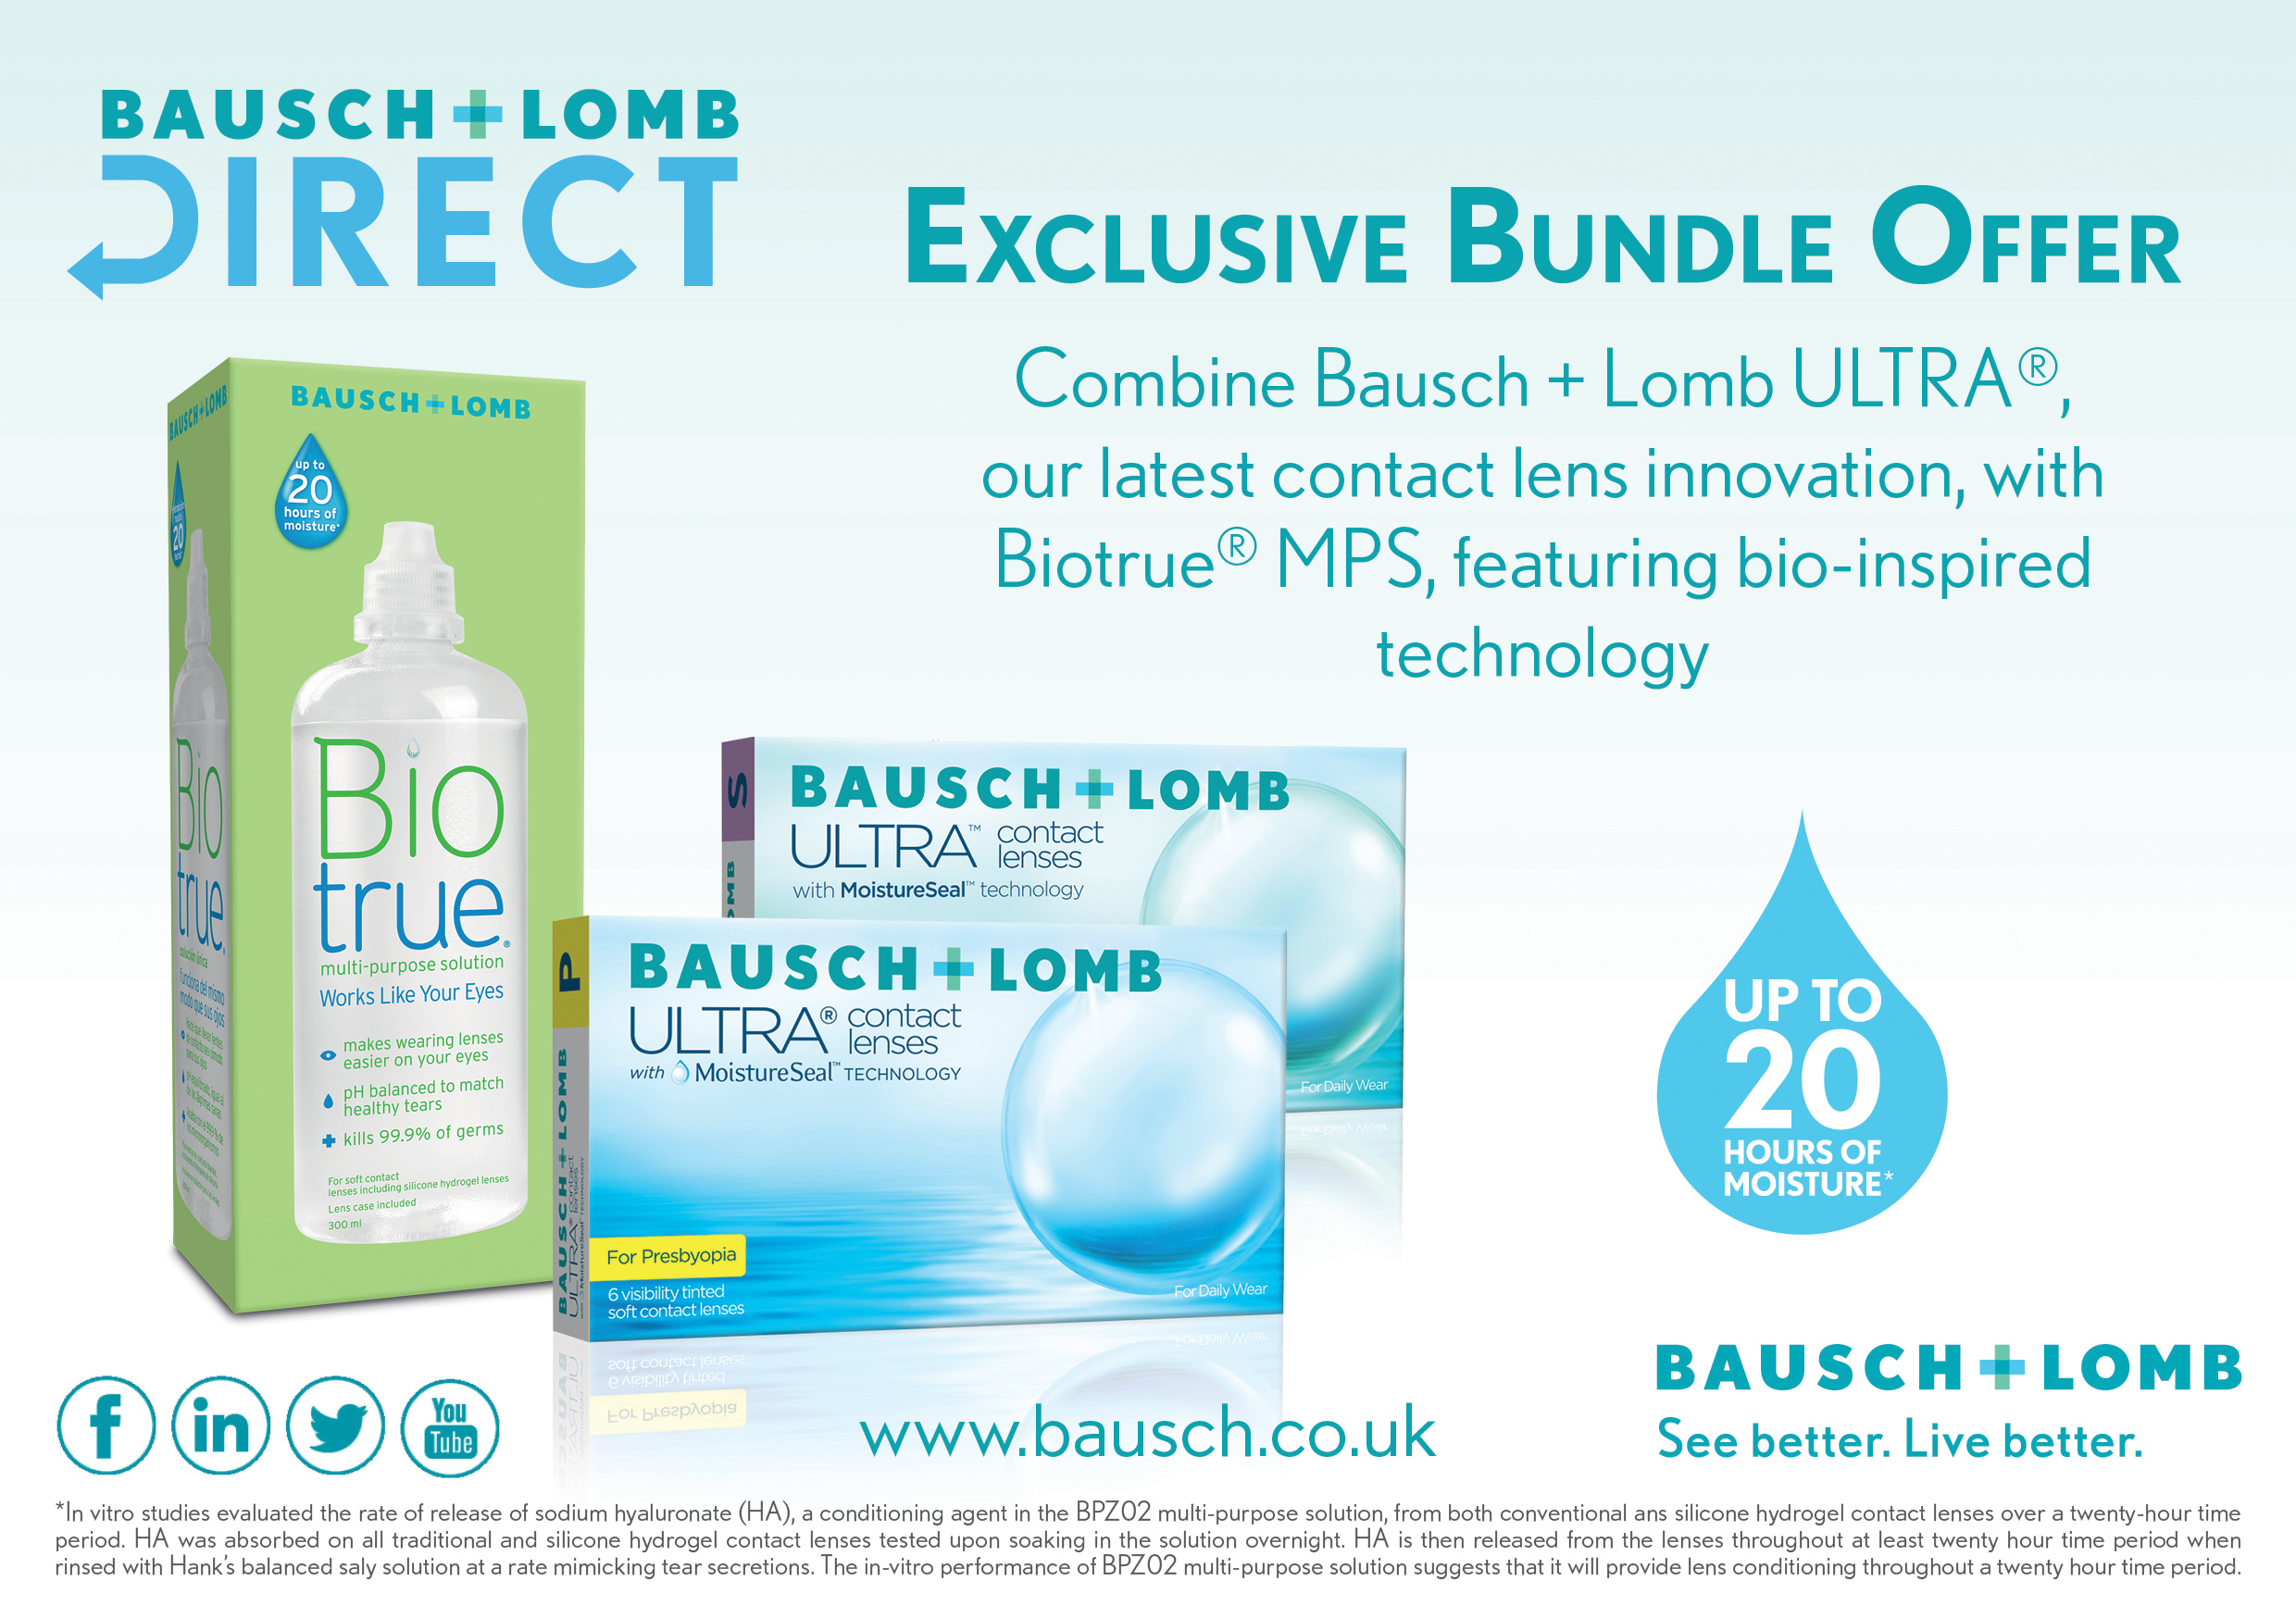 Bausch + Lomb ULTRA contact lenses for Presbyopia